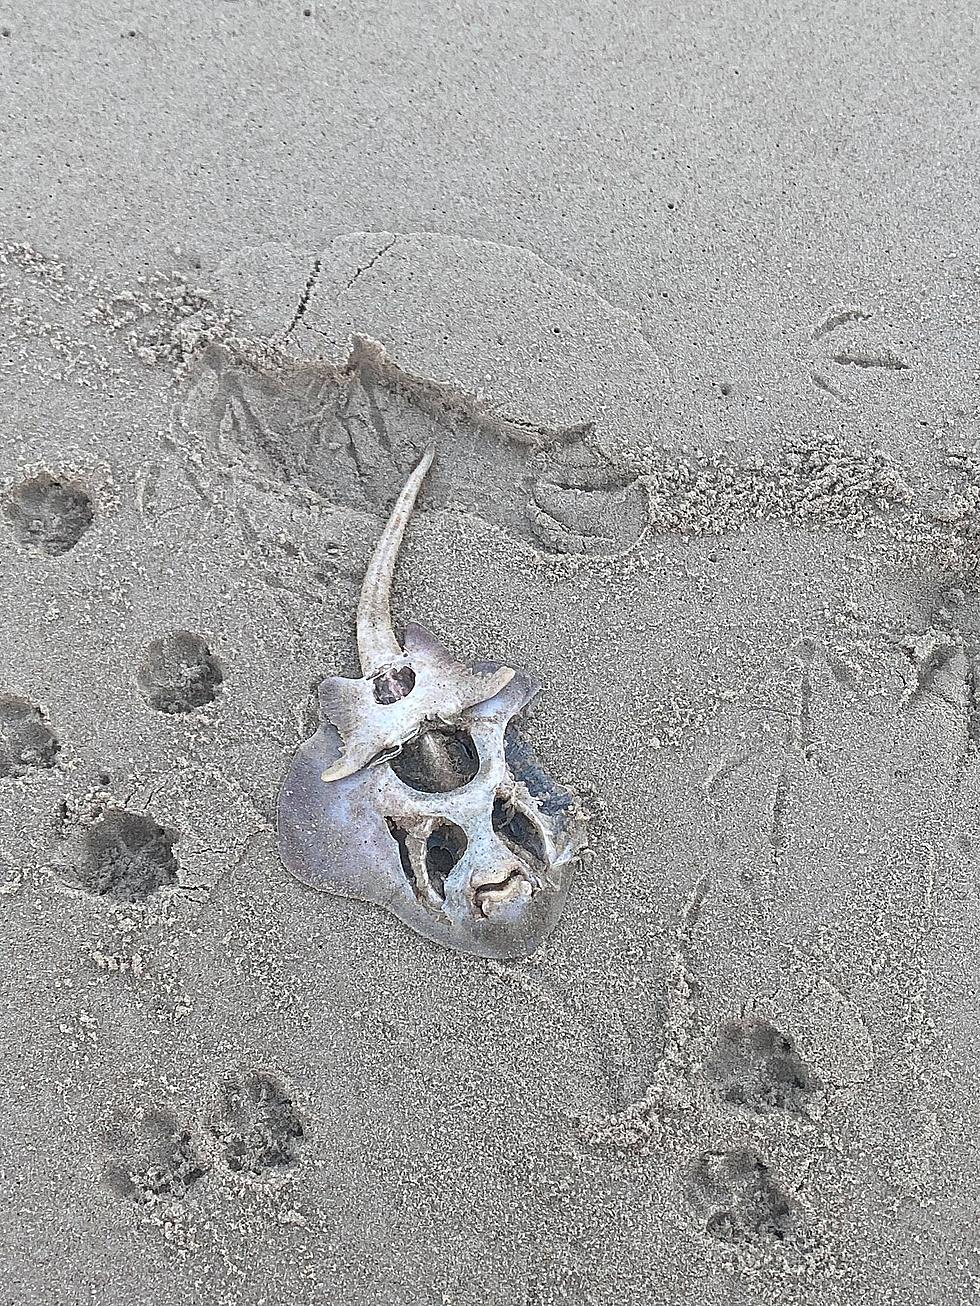 Attention Sea Lovers: What the Heck Is This Creature Found On A Jersey Beach?